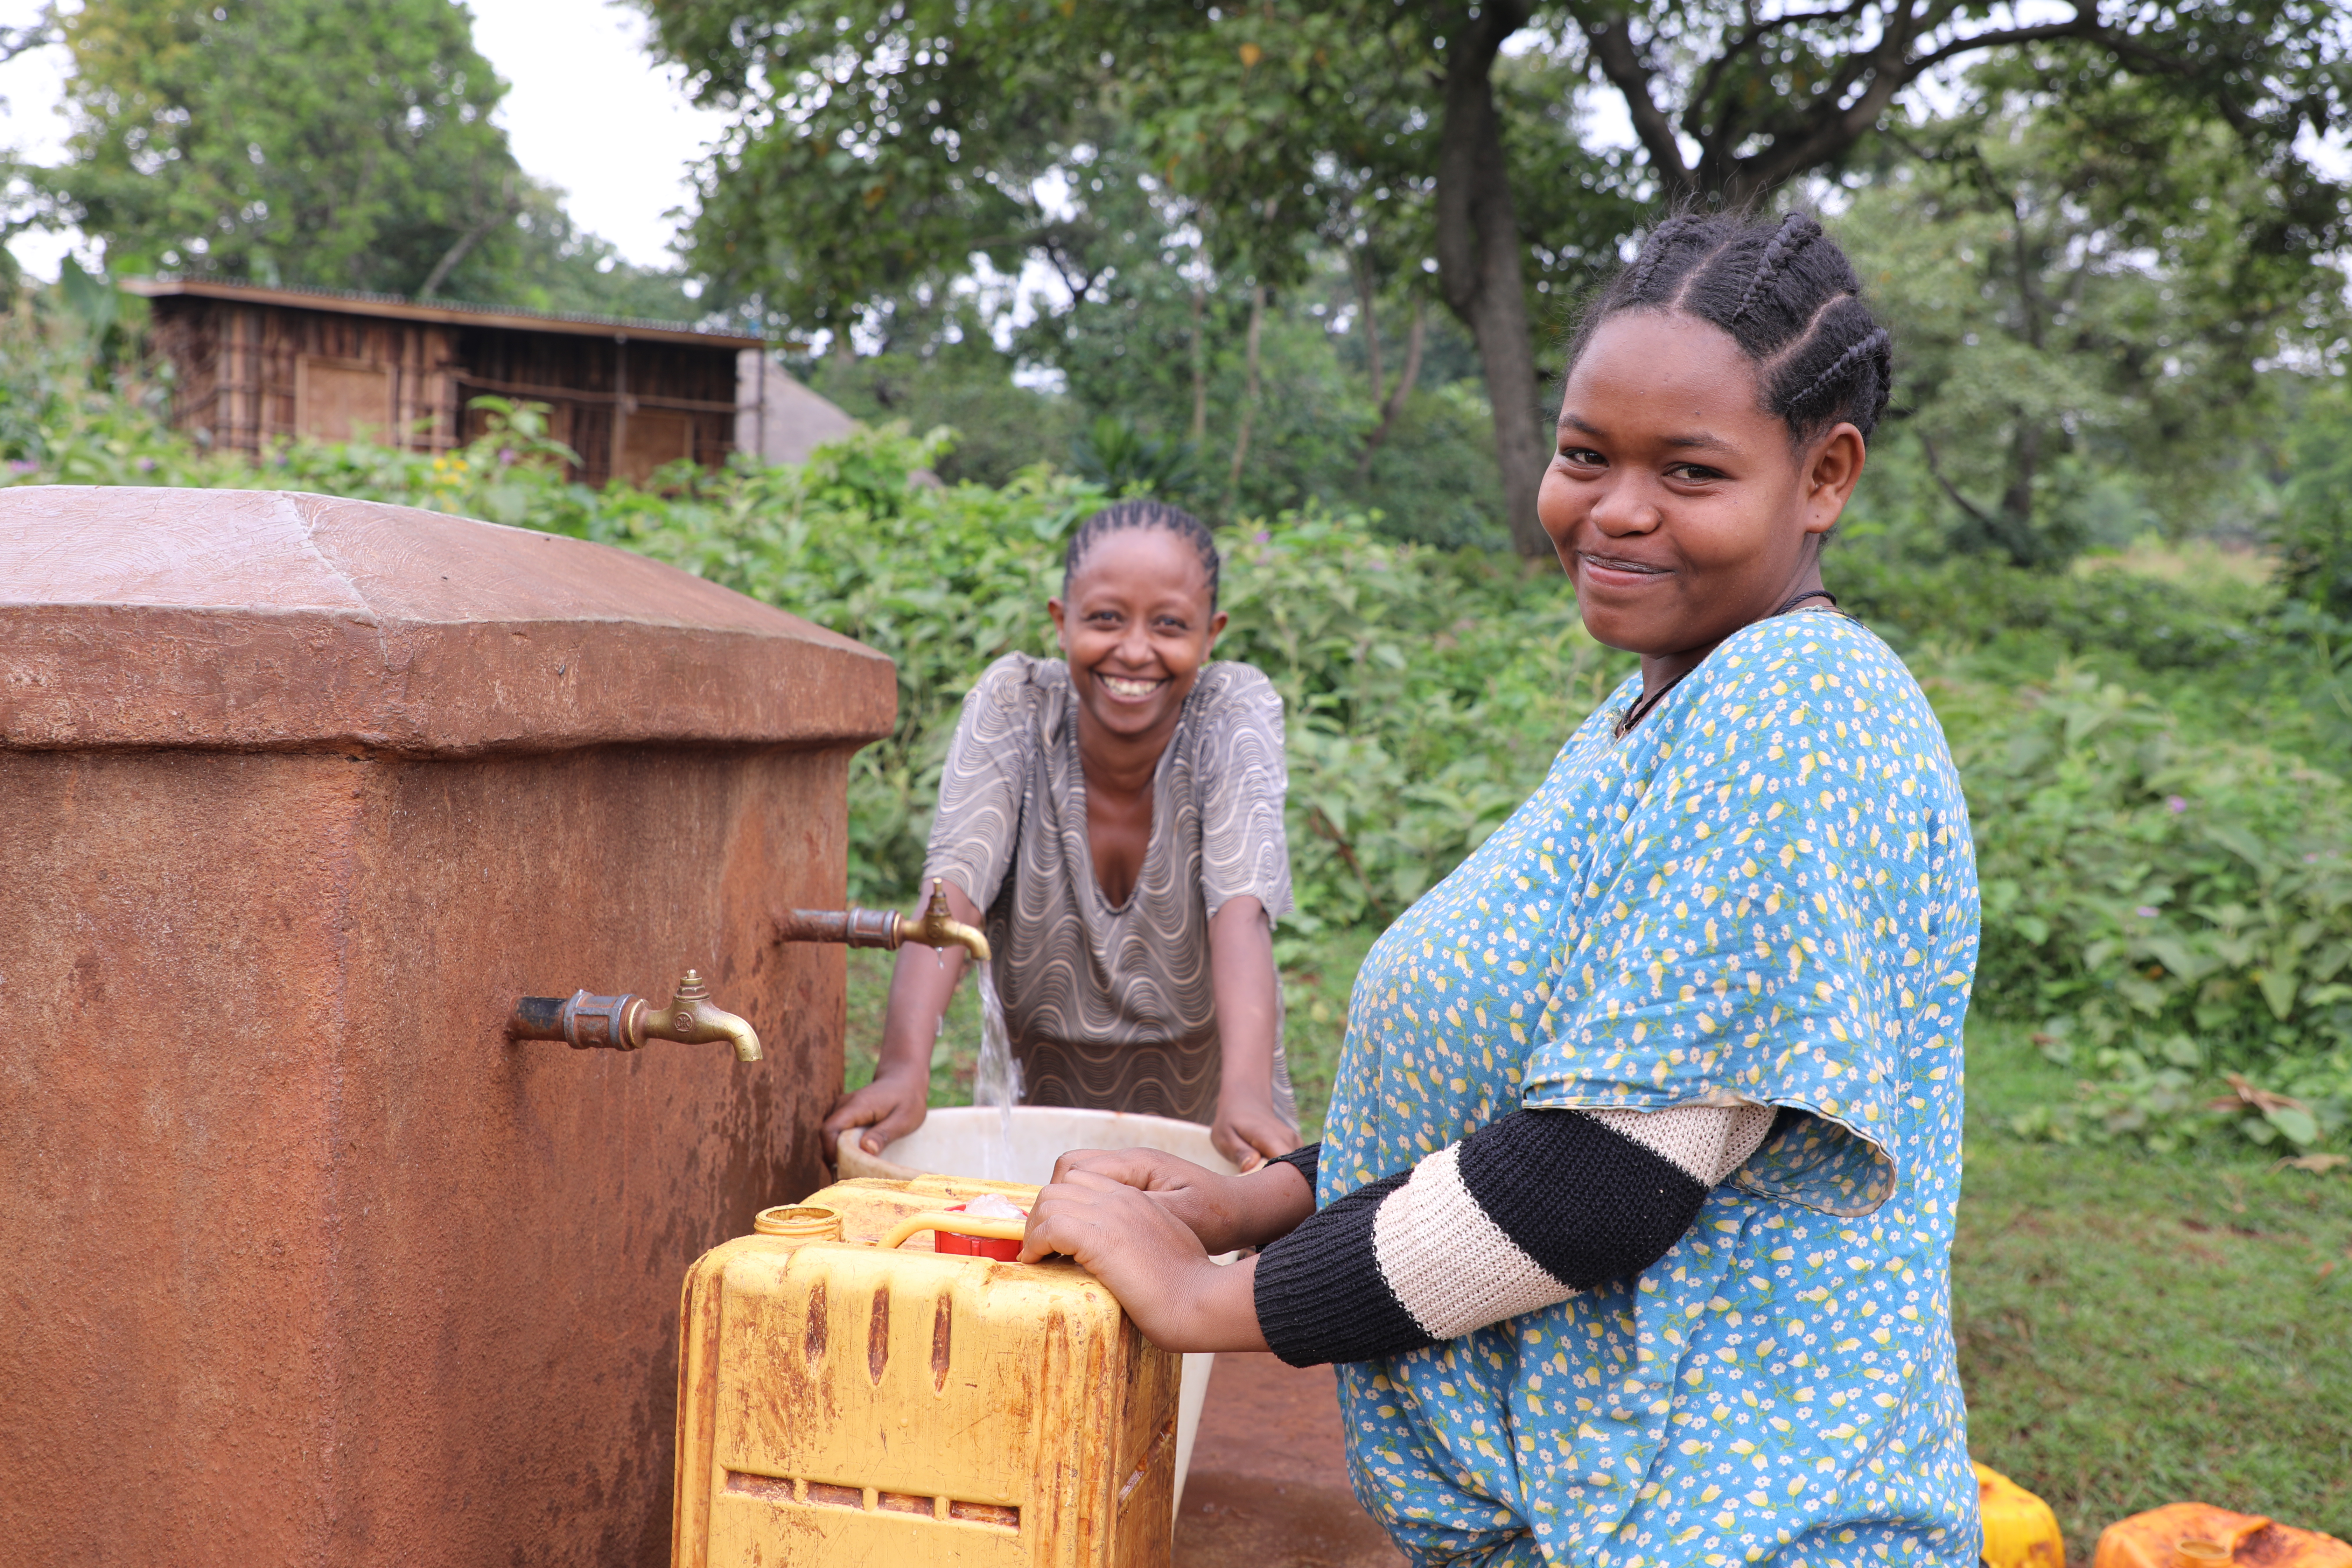 Two schoolgirls from Ethiopia filling up tubs of water for their households, while smiling and looking at the camera